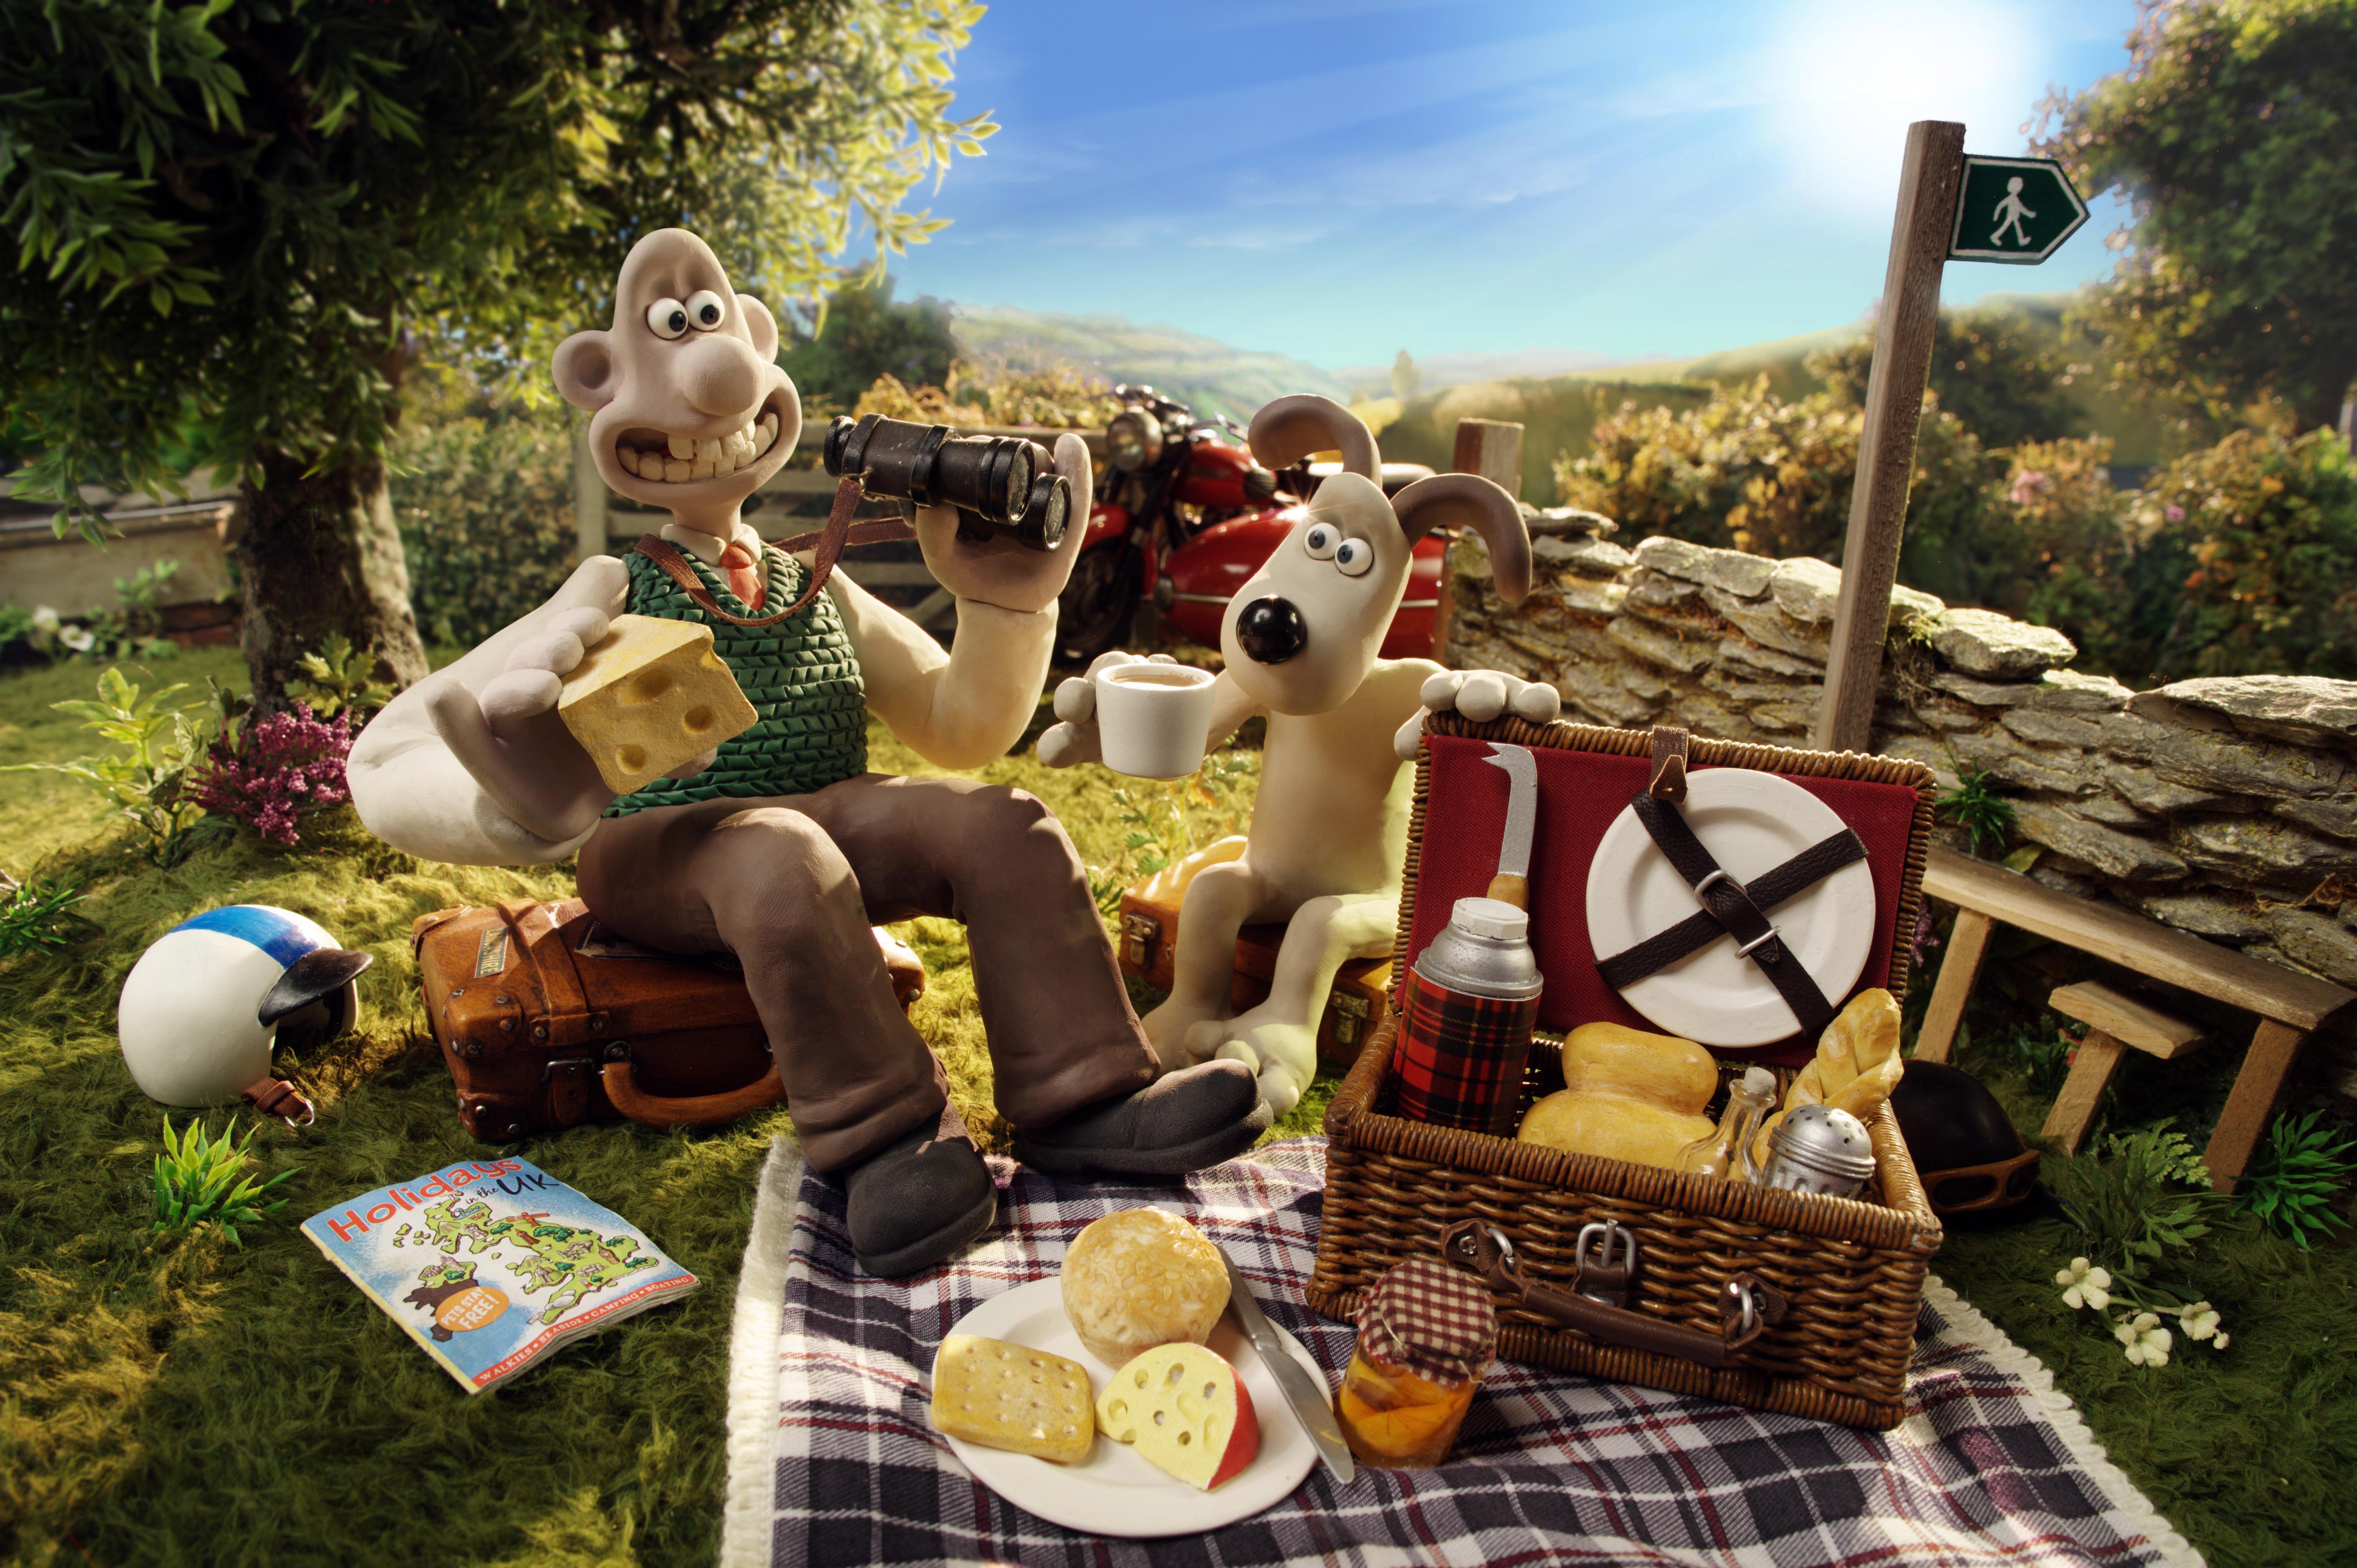 wallace Gromit Comedy Animation Family Adventure Wallpapers 5640x3752